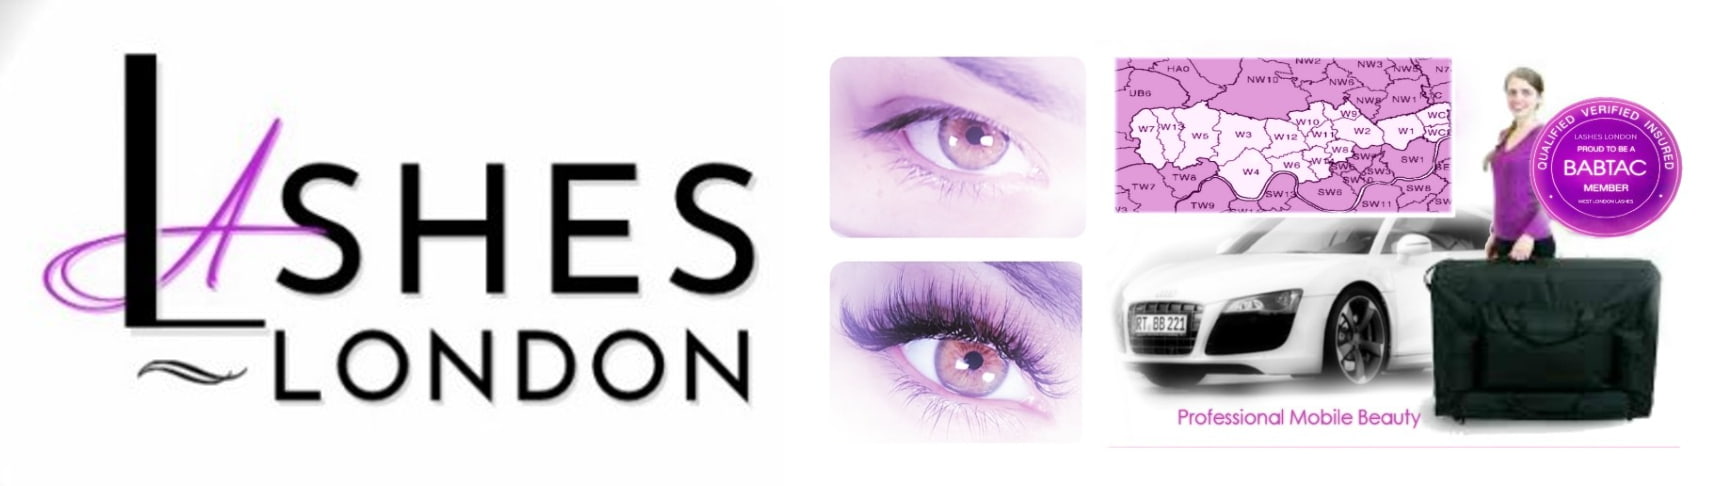 West London Lashes mobile beauty specialist